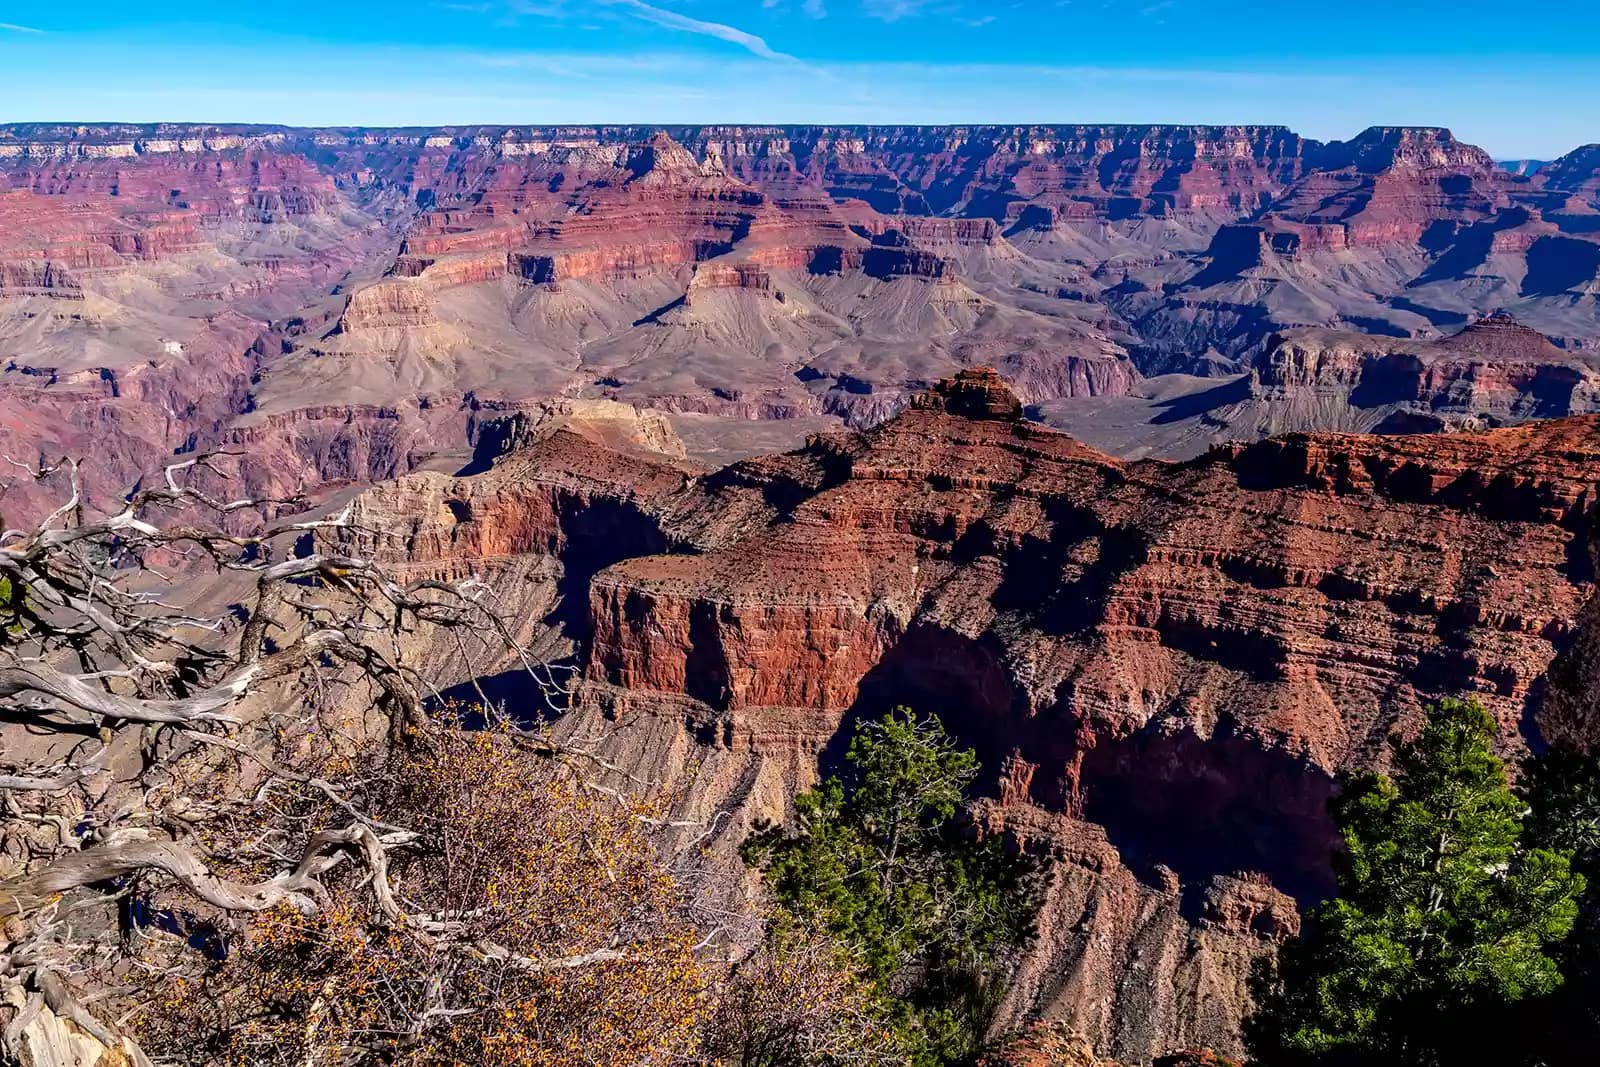 Arial image of Grand Canyon in Arizona